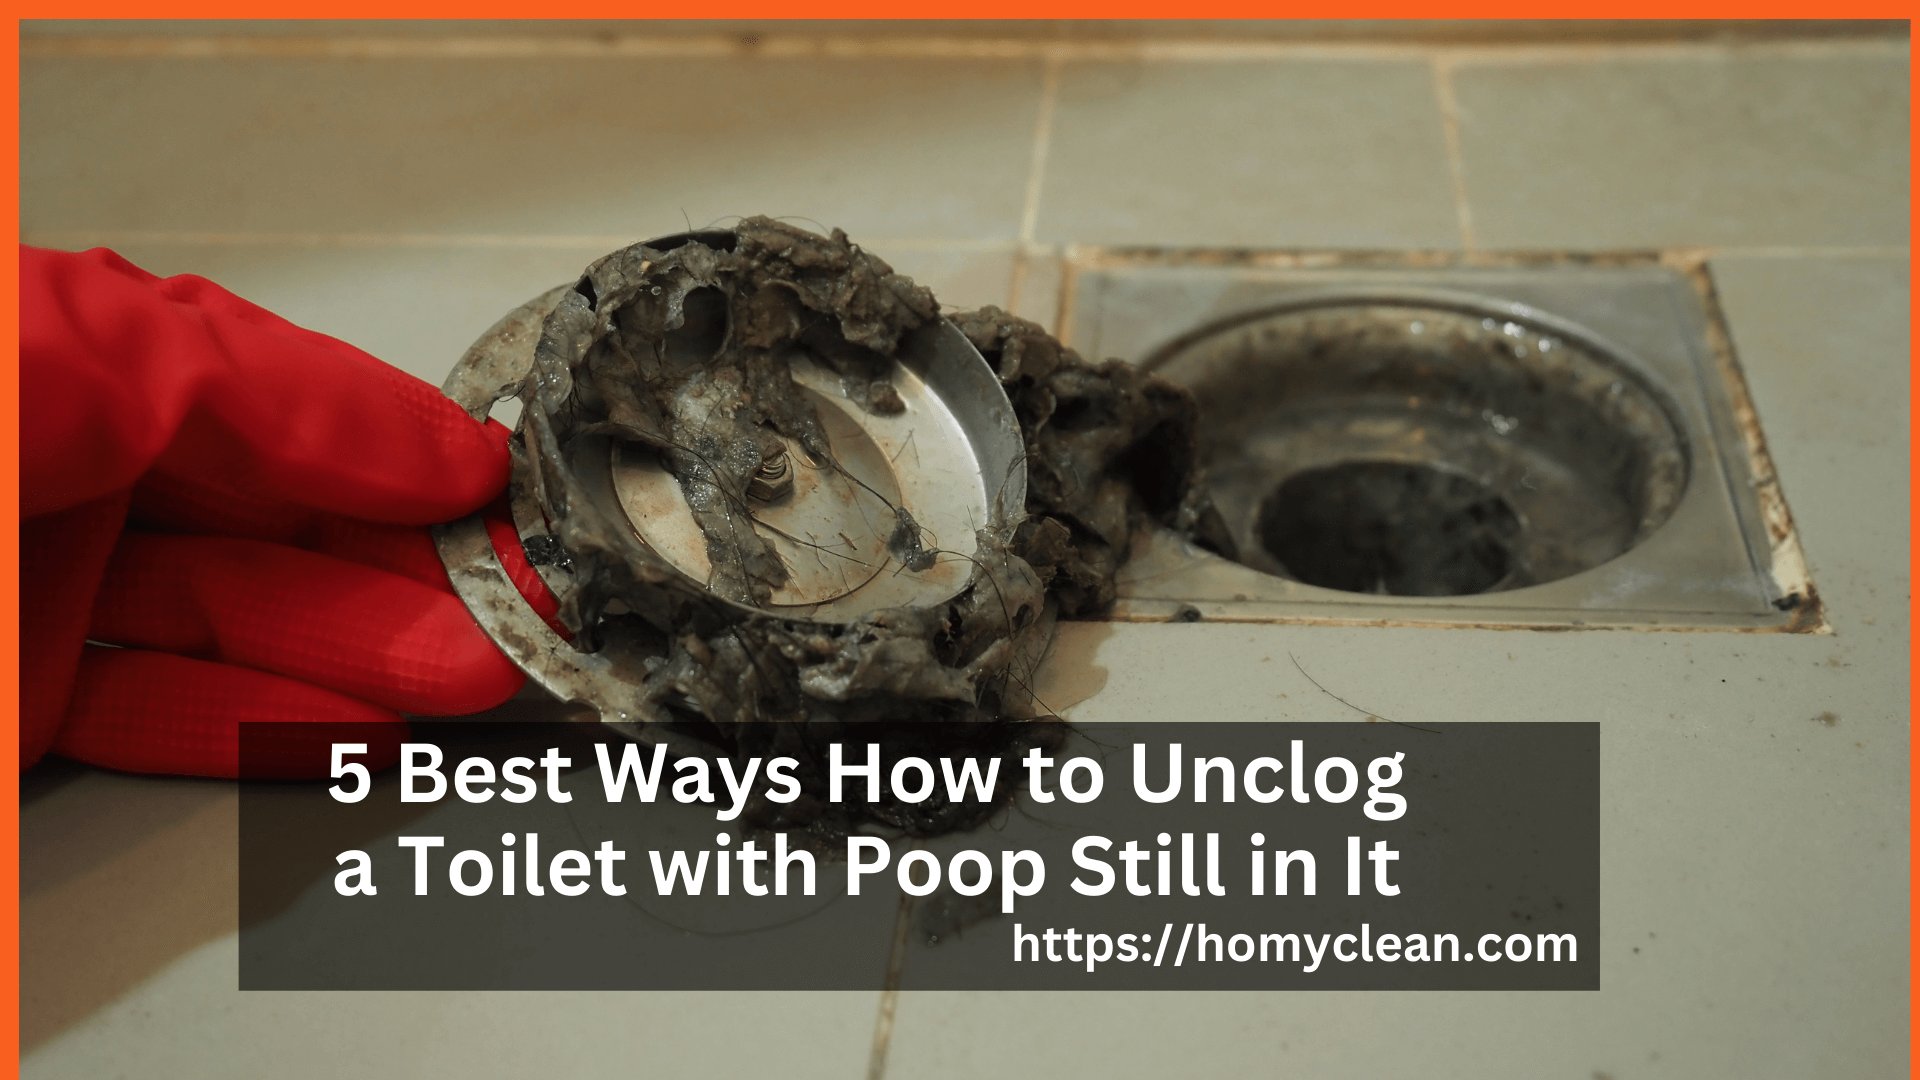 How to Unclog a Toilet with Poop Still in It